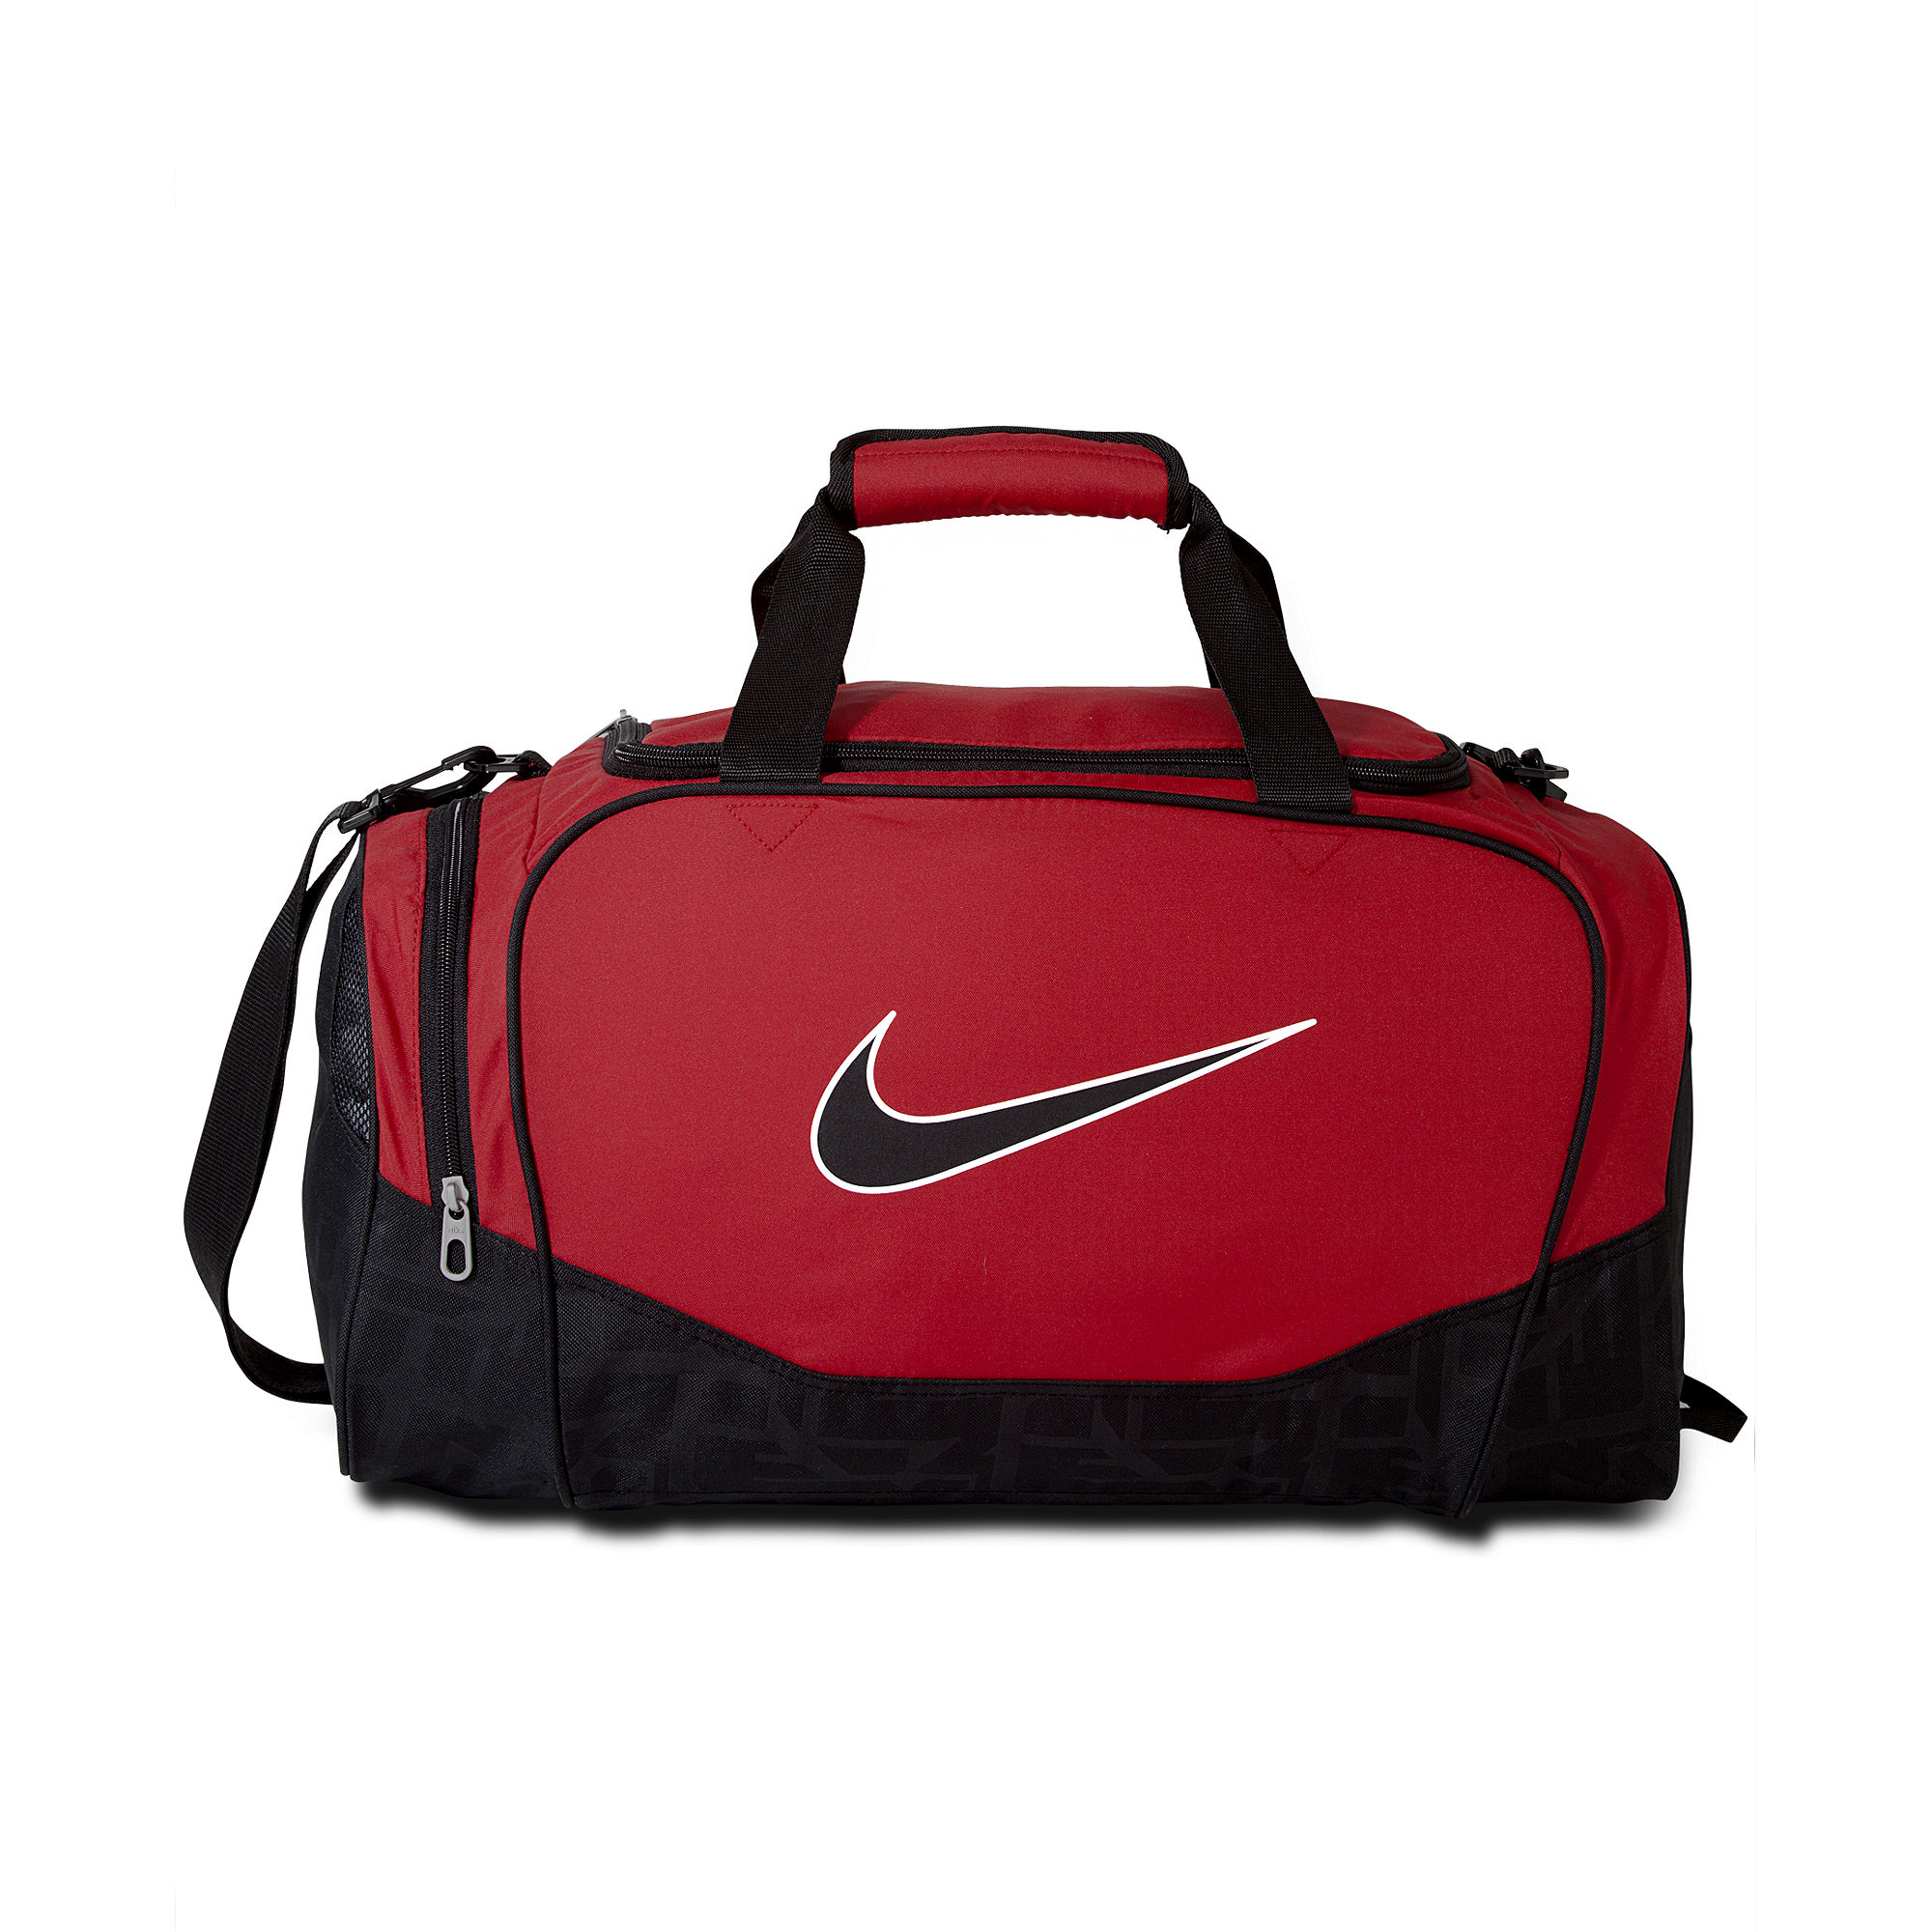 Nike Small Duffle Bag in Midnight Navy (Red) for Men - Lyst